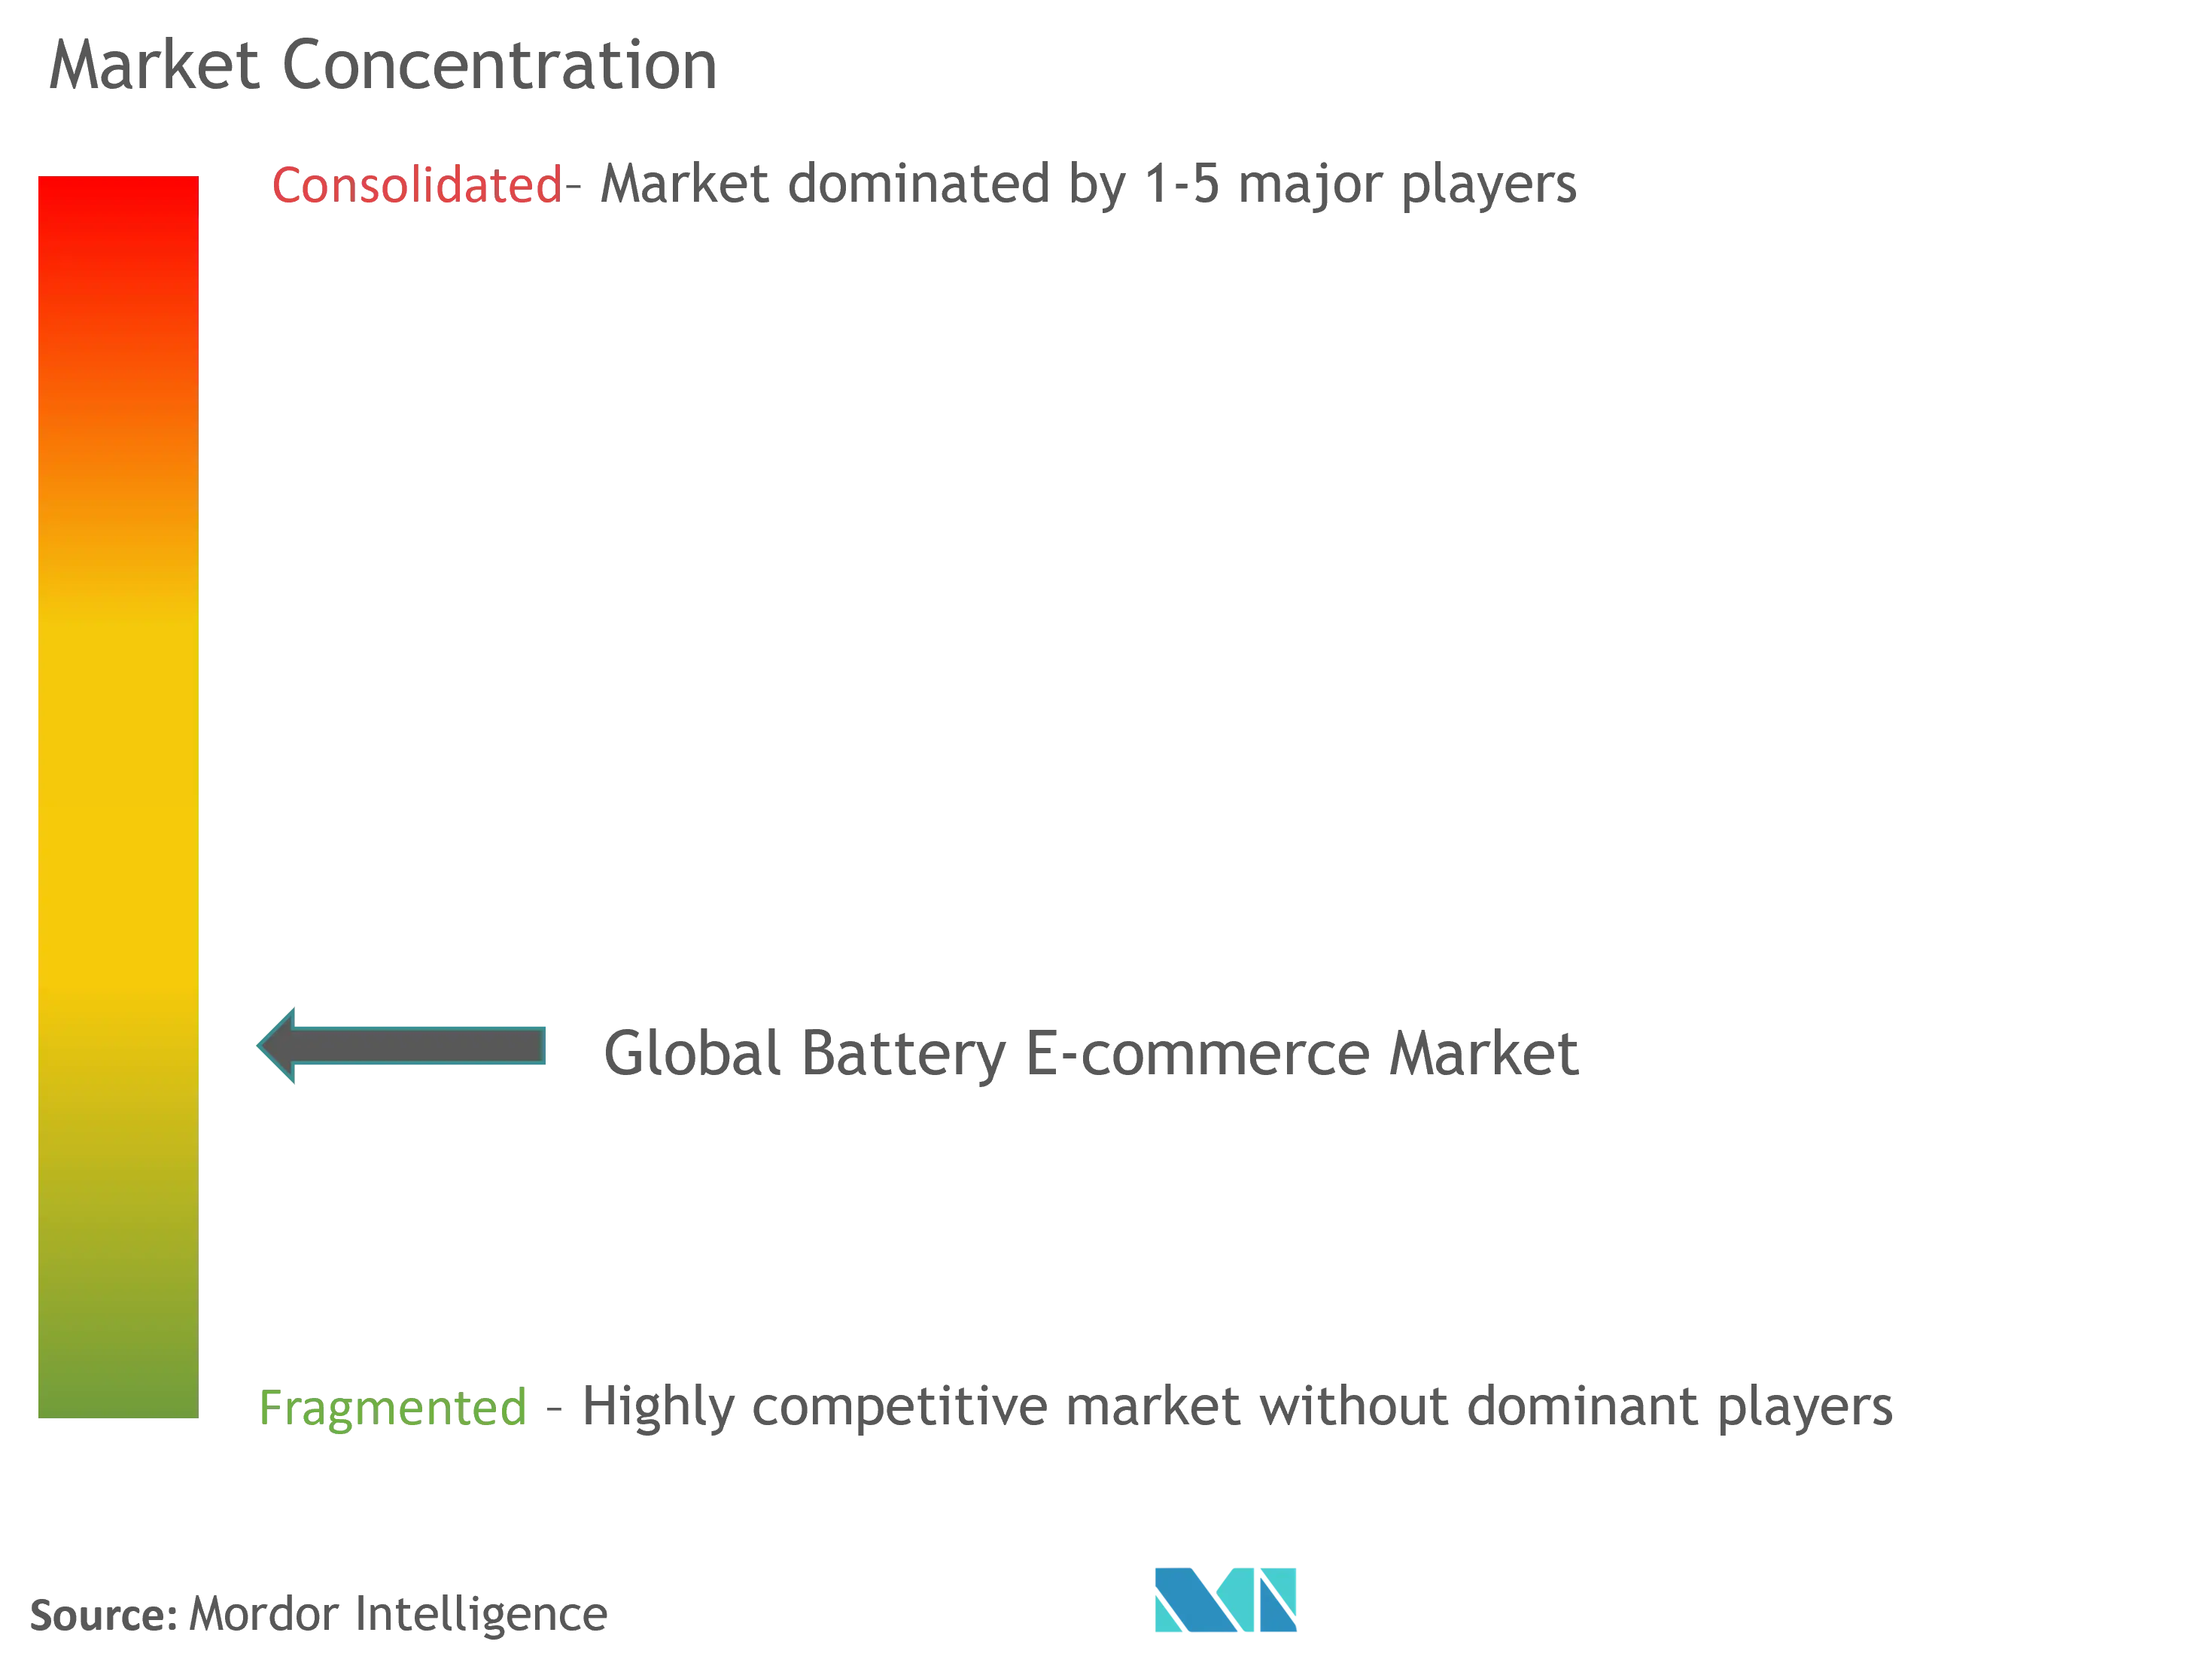 Template-Global Battery E-commerce Market Concentration